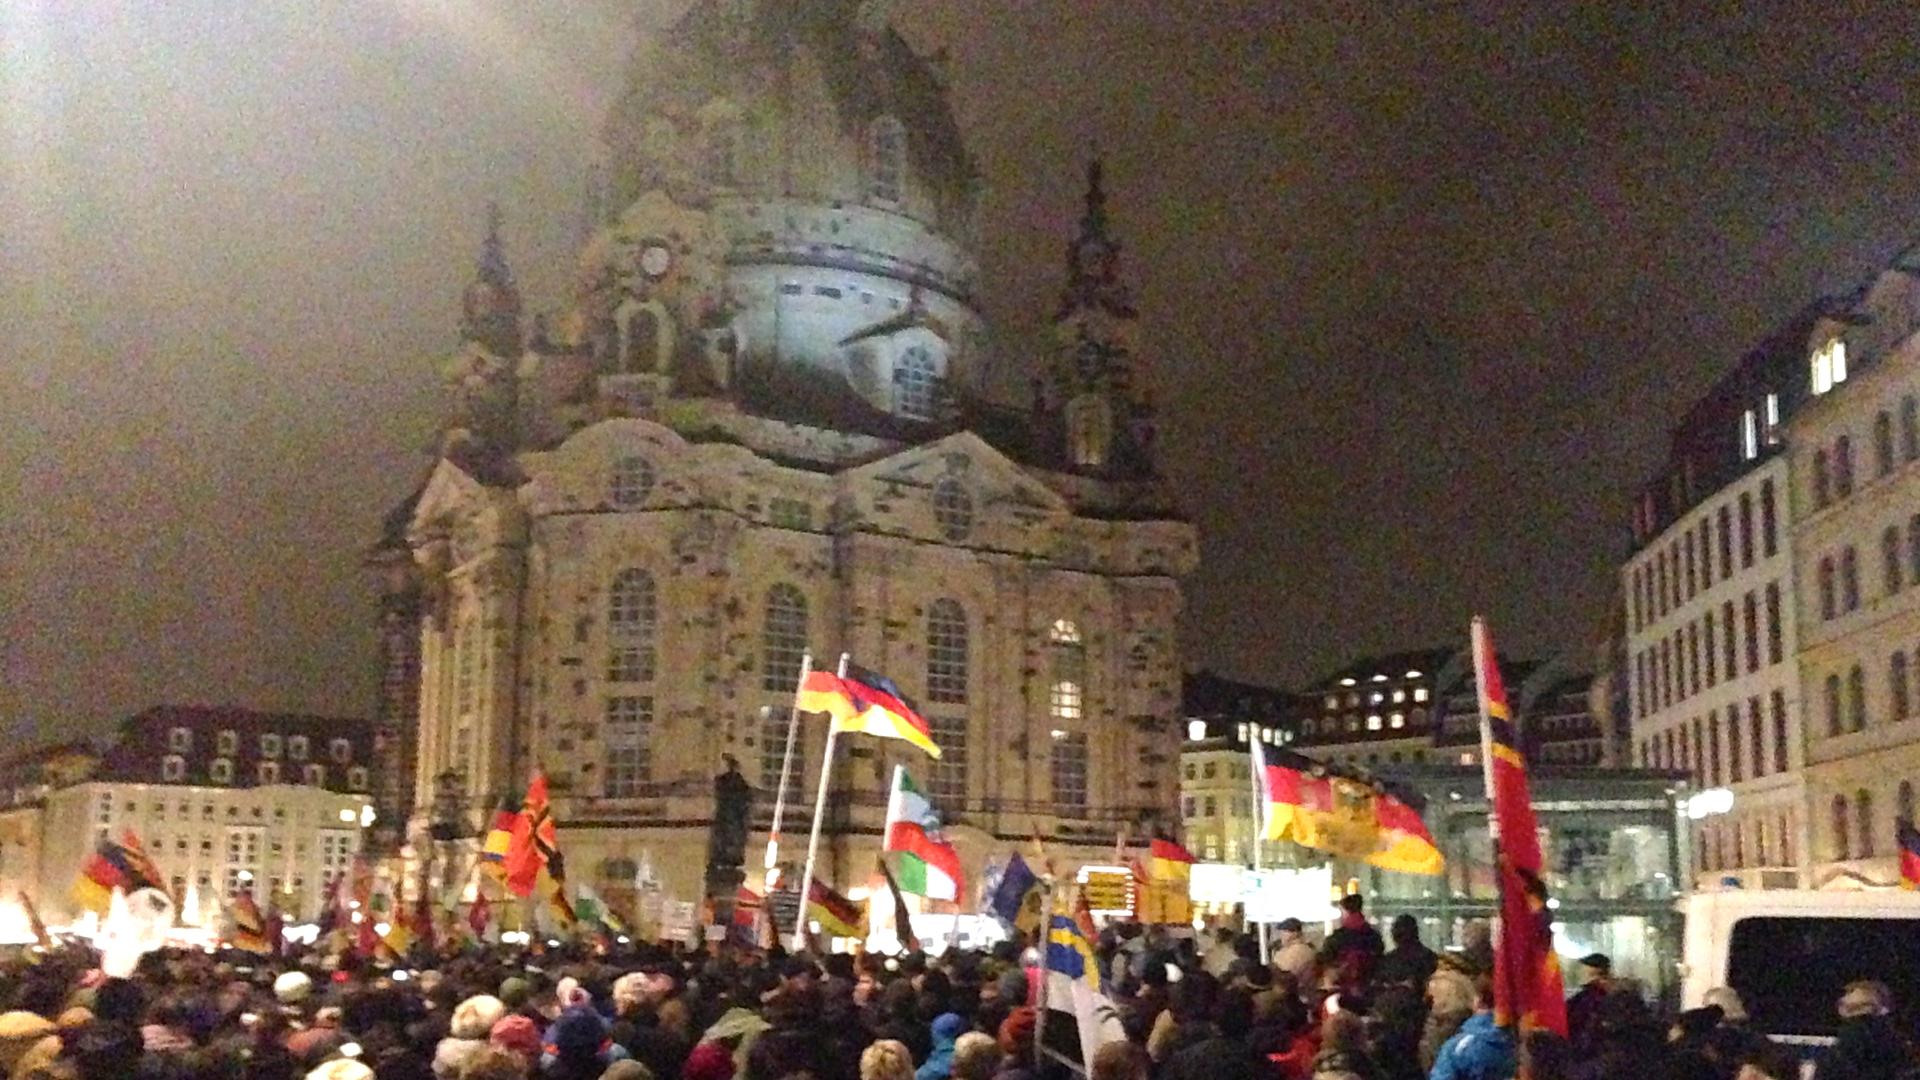 The lights at the Frauenkirche went dark on Monday for the PEGIDA rally.